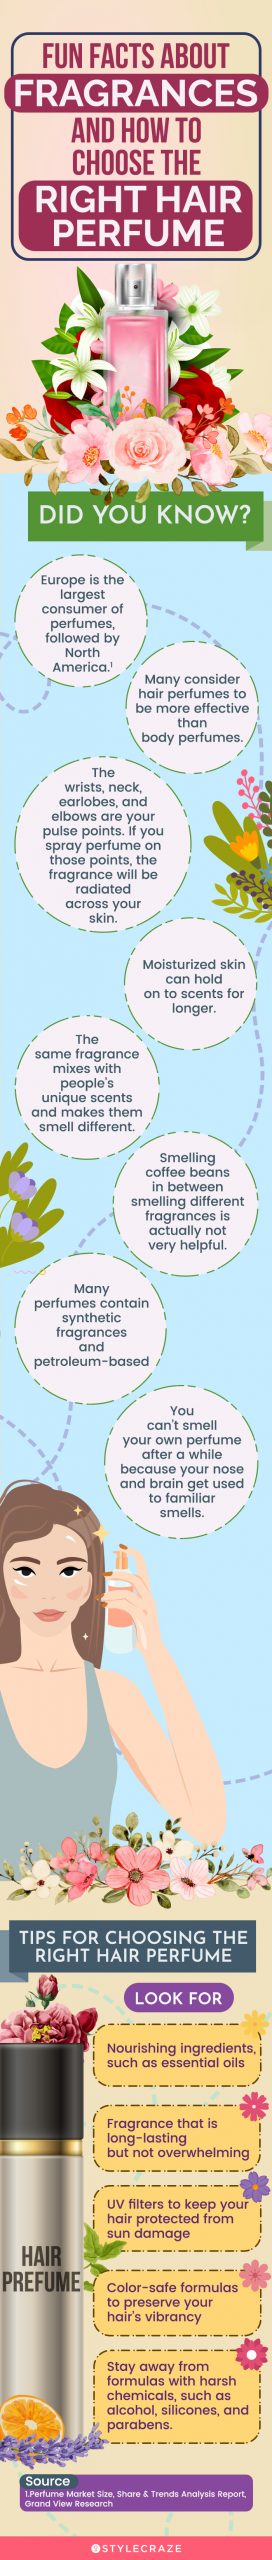 Facts About Fragrances And How To Choose The Right Hair Perfume (infographic)